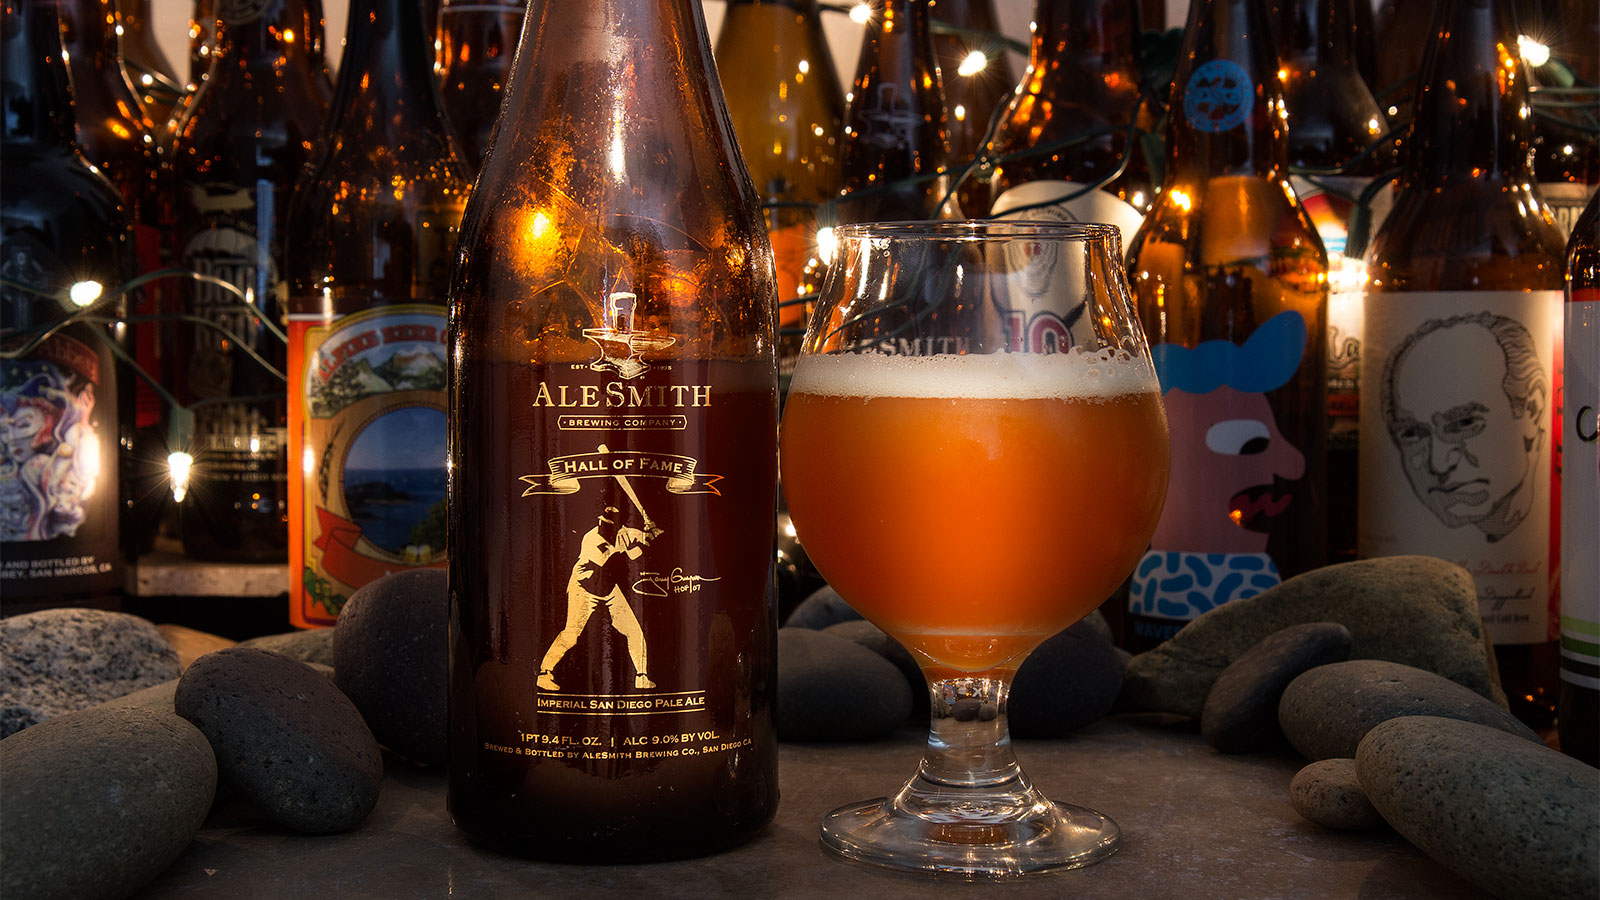 Alesmith Hall of Fame Imperial Pale Ale - Evolved - Inside The Craft